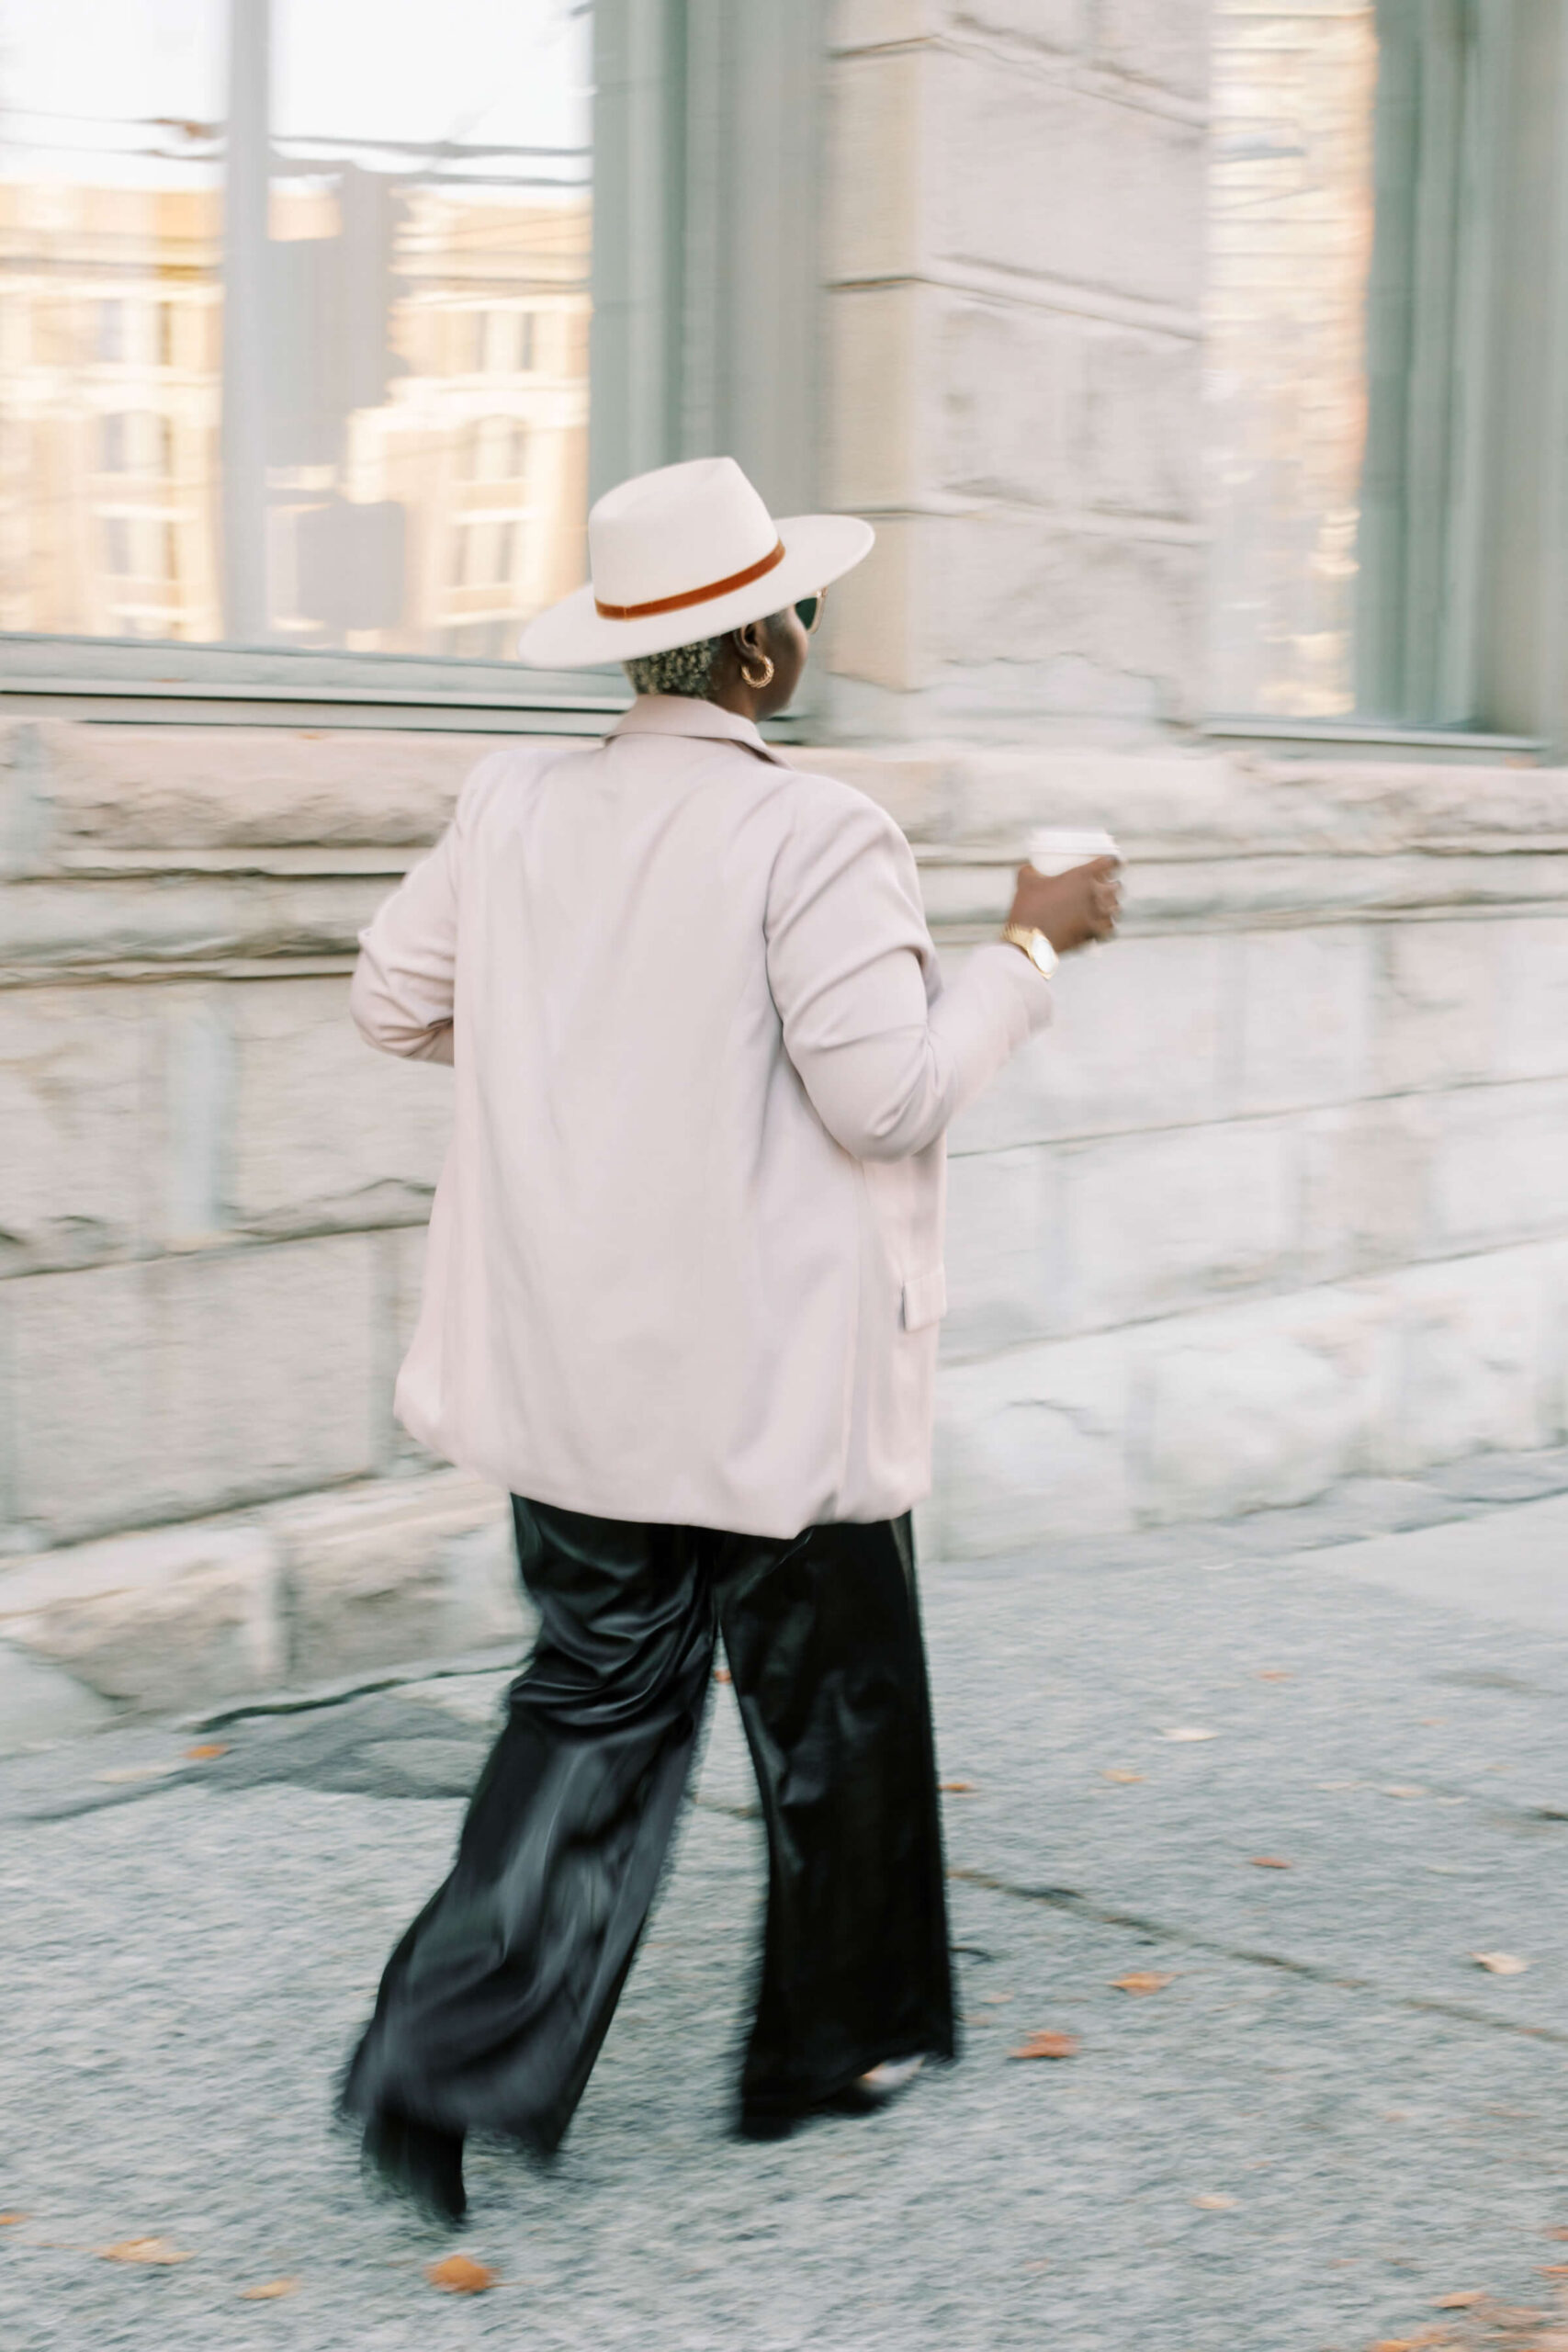 Black woman walking in city while holding coffee cup